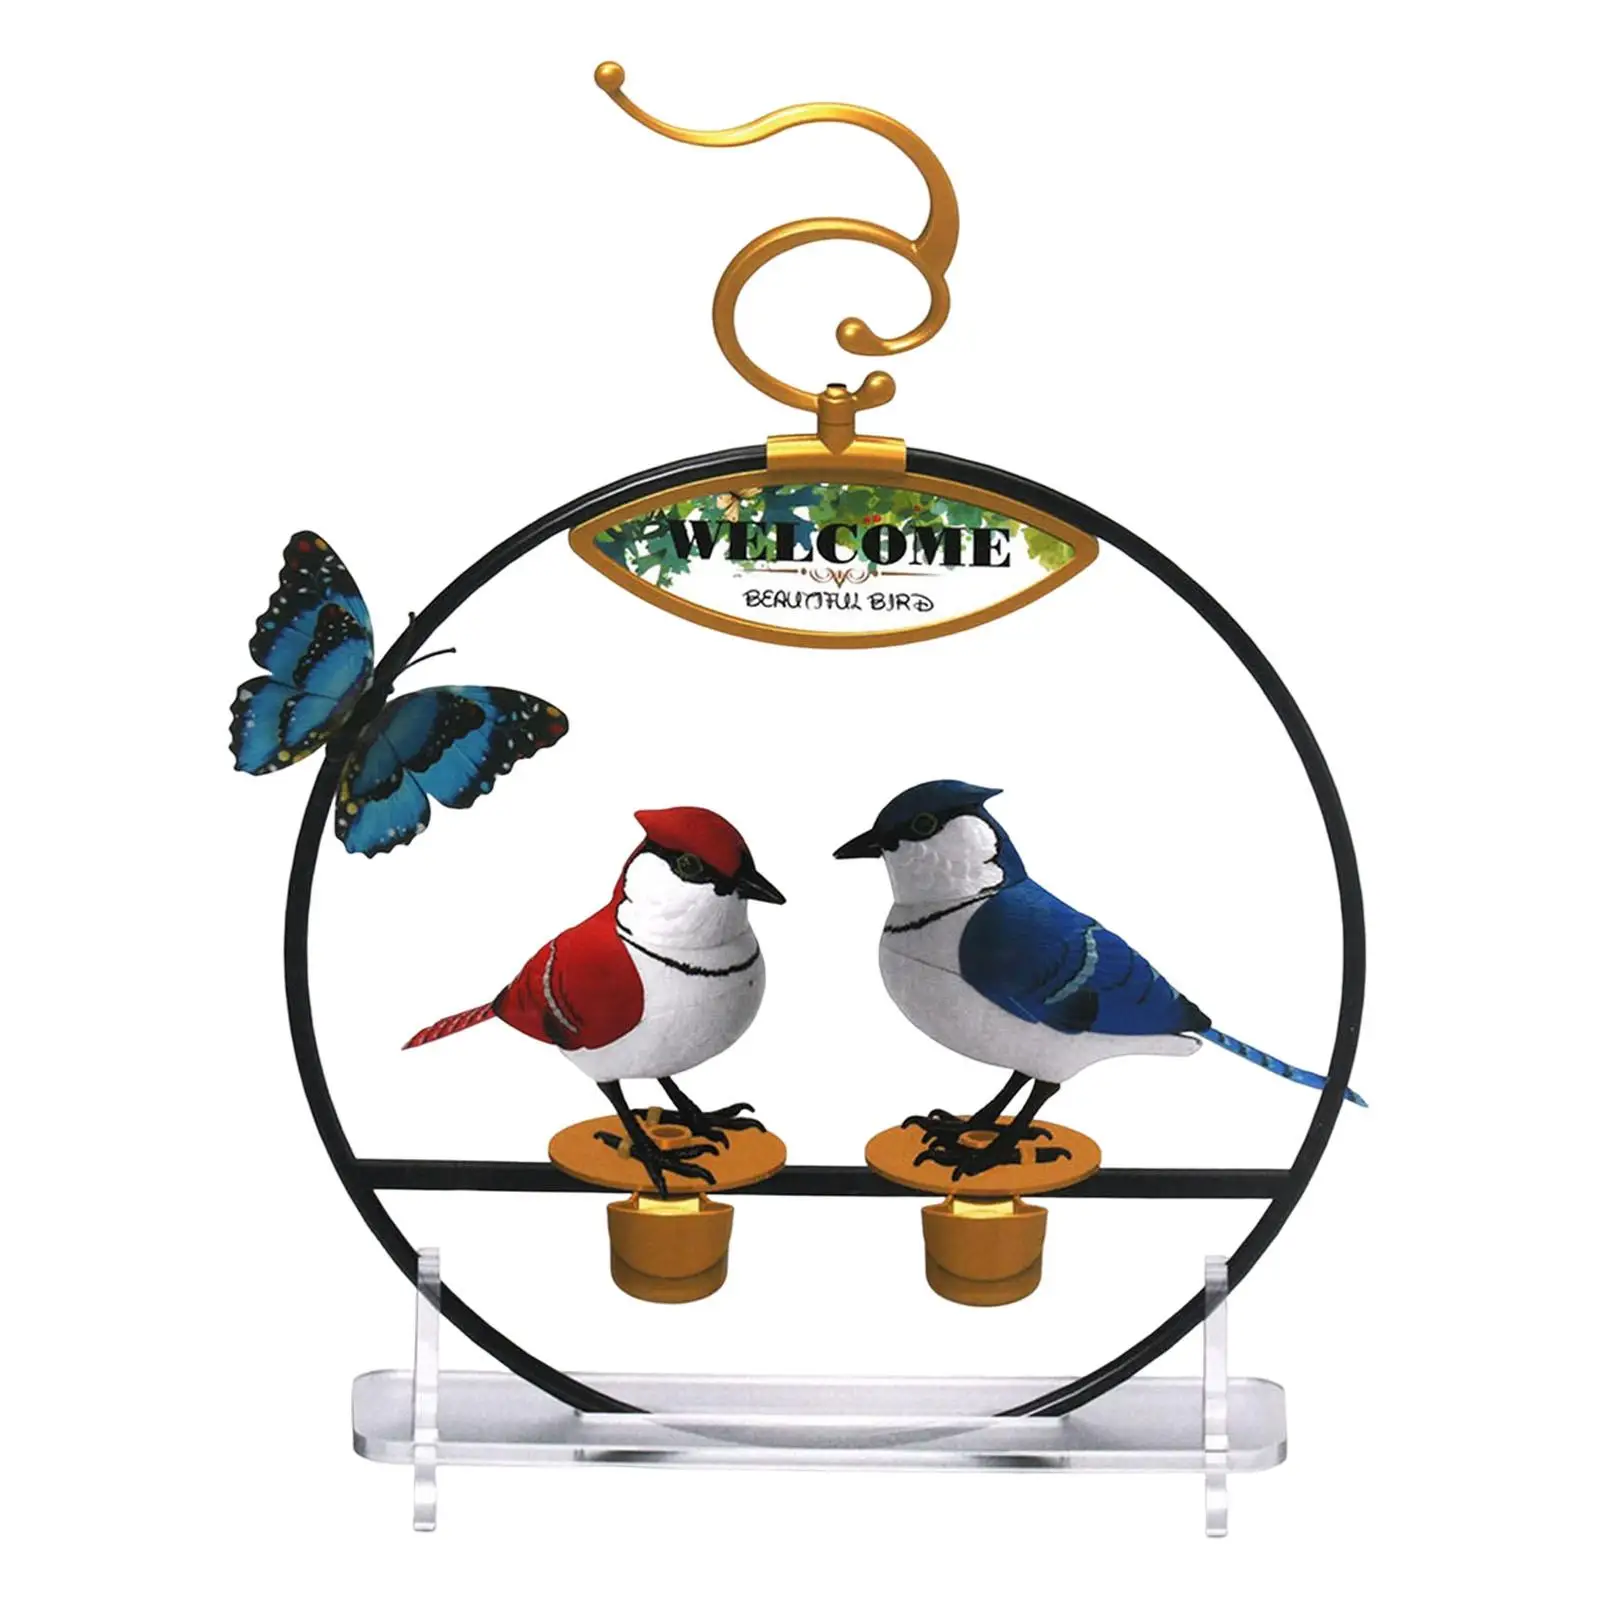 Adorable Sound Activated Chirping Bird with Voice Sensor Kids Toy Gift